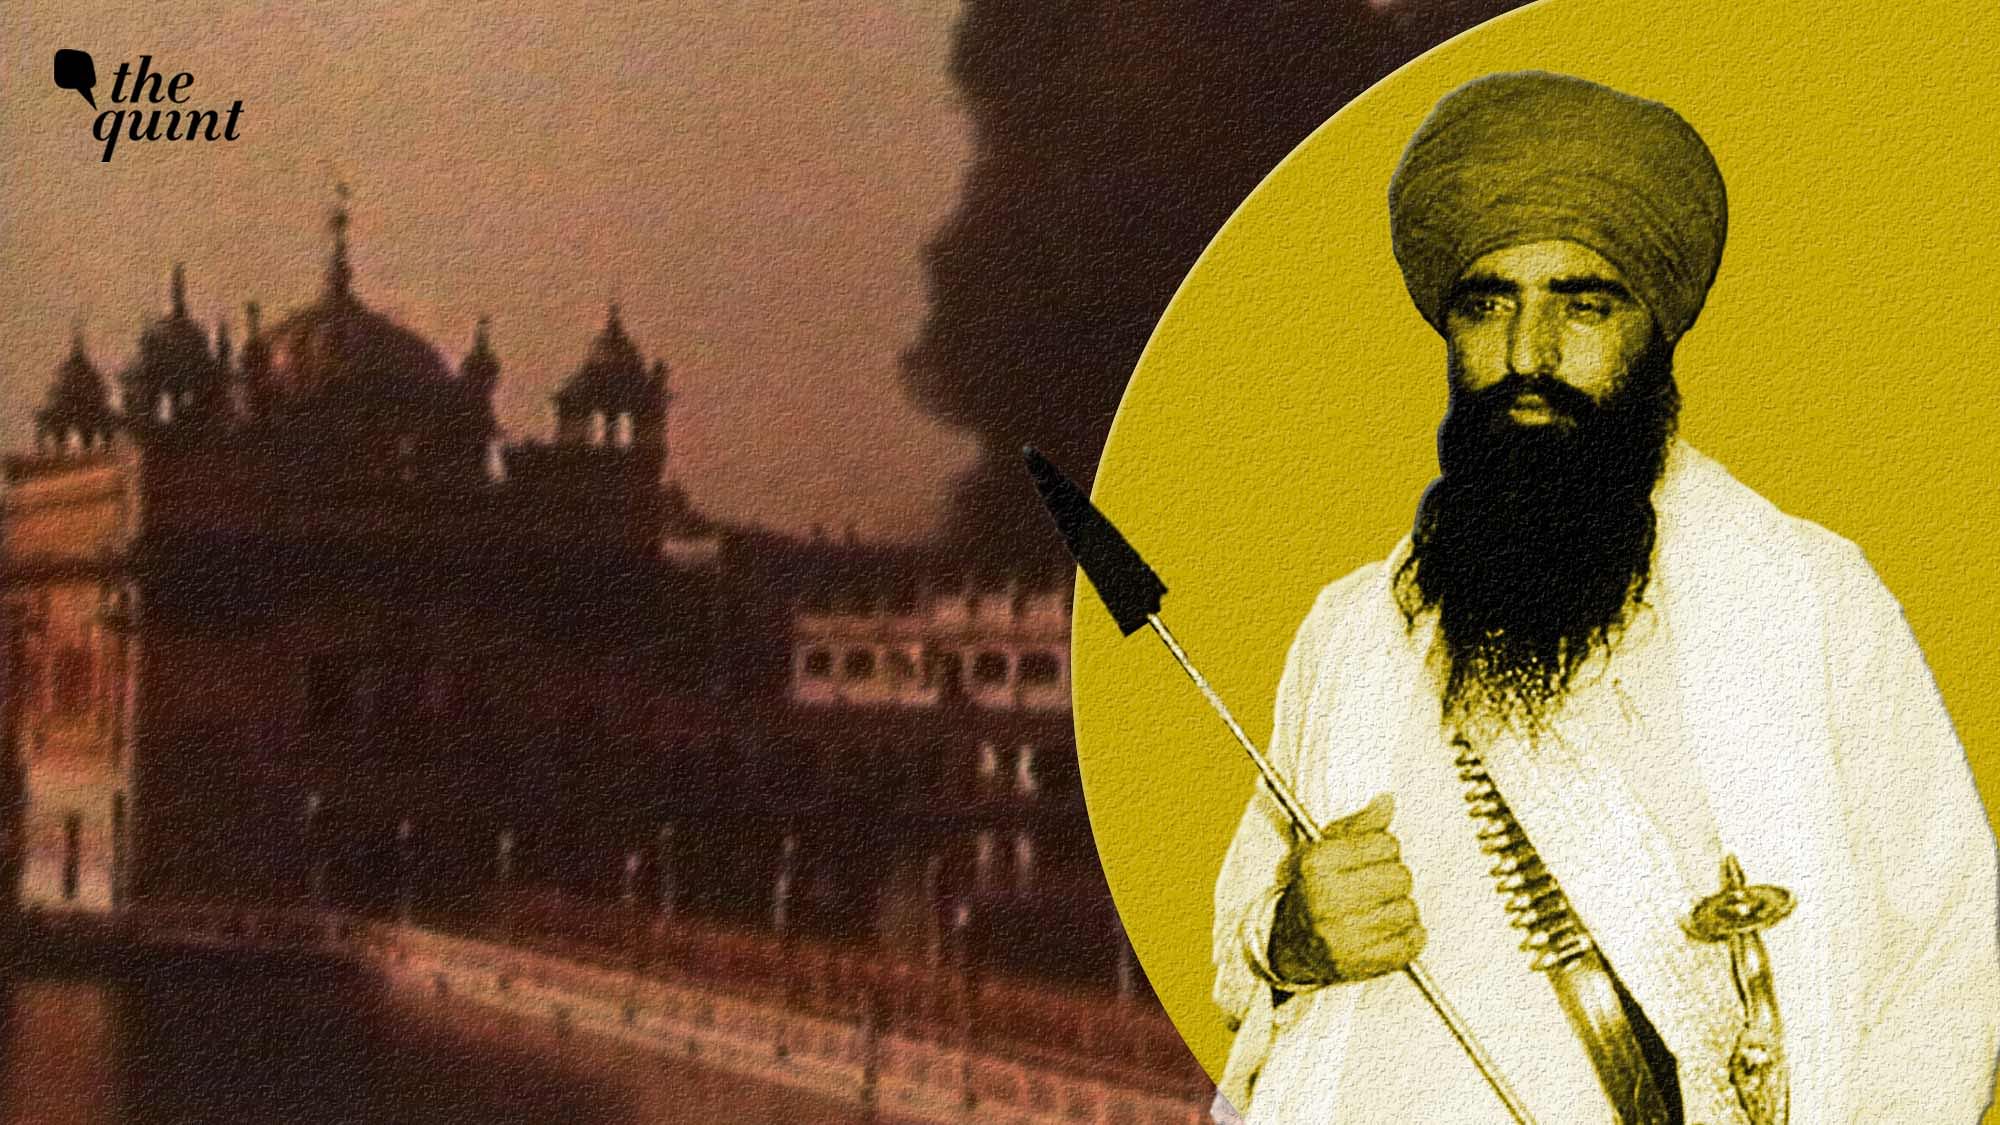 <div class="paragraphs"><p>For reasons inexplicable, Bhindranwale was allowed to spew venom and preach Khalistani separatism for years.</p></div>